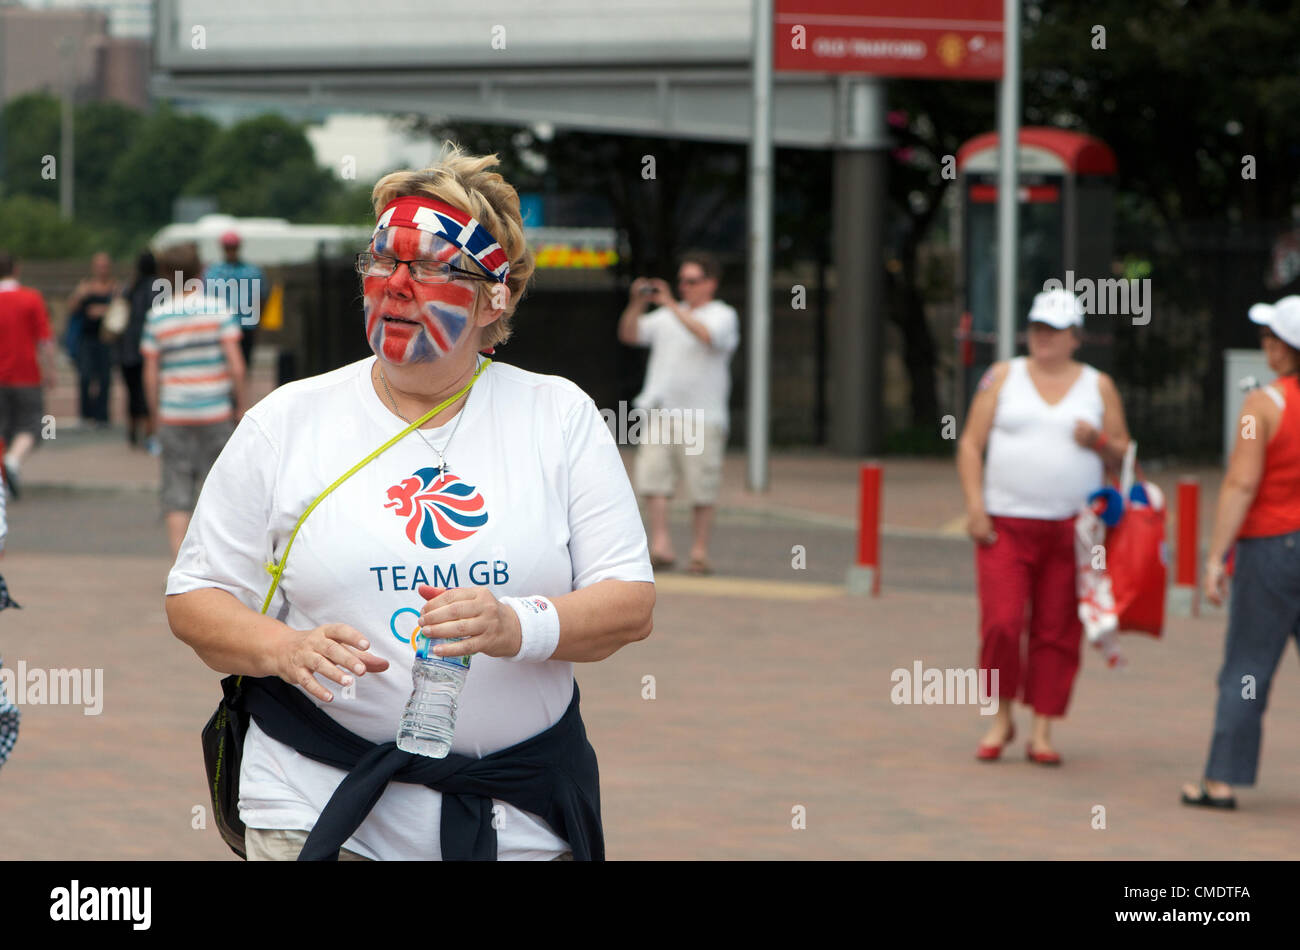 Manchester, UK. 26th July, 2012. A woman wearing a Team GB shirt and  with her face painted as the Union Flag outside Old Trafford, Manchester United's ground, where the first Olympic Football matches at the ground will be played later in the afternoon. Uruguay v United Arab Emirates will be followed by Great Britain v Senegal, 26-07-2012 Stock Photo